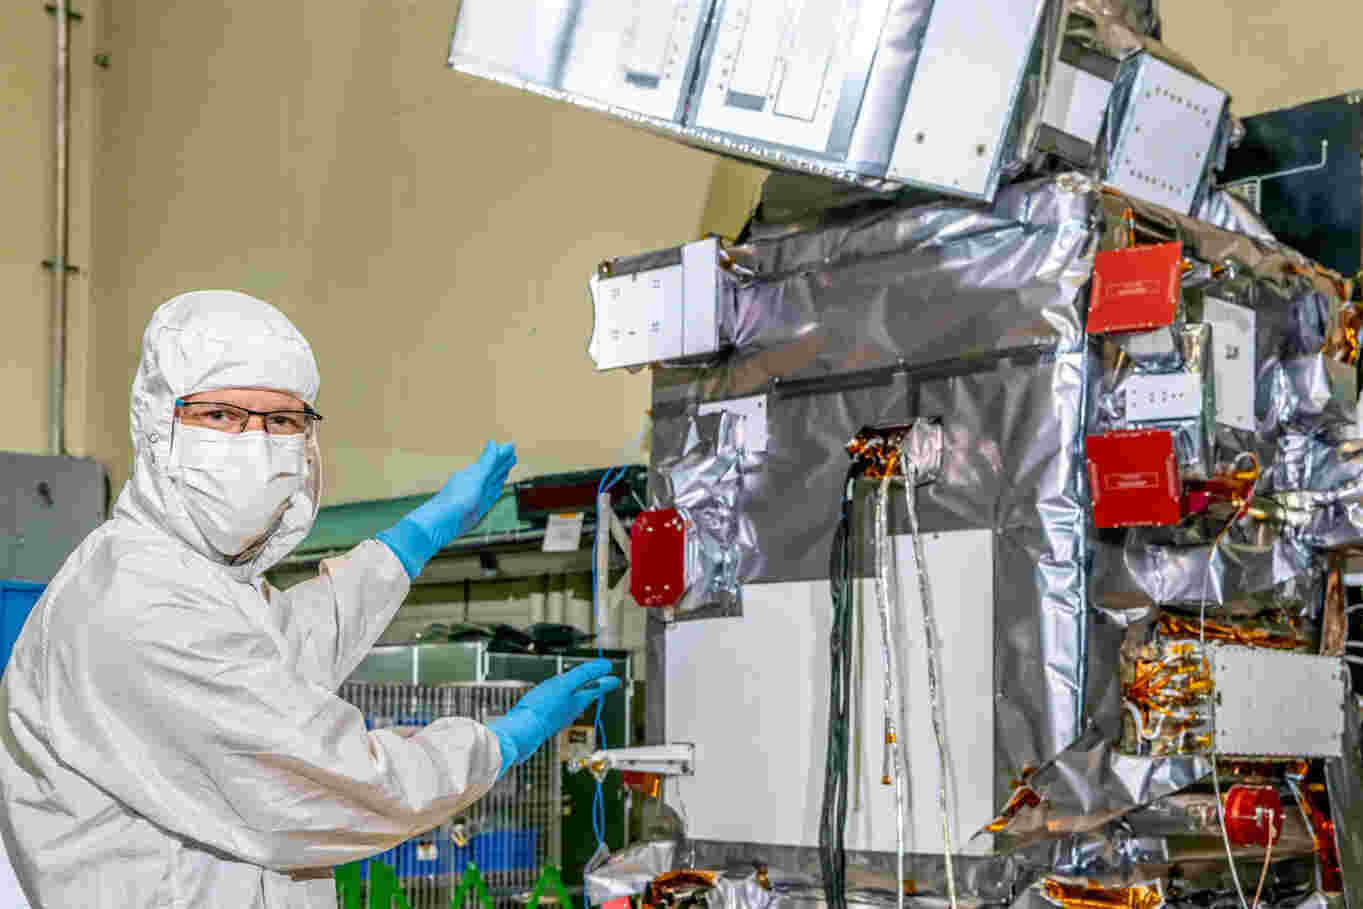 Jeroen Rietjens is pictured in the Goddard cleanroom with the PACE satellite. He expressed his pride at being able to pose with the fully assembled and tested PACE satellite, which hosts their small SPEXone instrument. The instrument is neatly wrapped in grey thermal blankets and still has the red radiator cover in place. Rietjens finds it surreal to realize that in just a few months, it will be staring at the Earth and collecting multi-angle spectro-polarimetric data. This data will enable scientists to infer the amount and type of aerosols in the Earth's atmosphere, contributing to a better understanding of the effects of aerosols on climate. The credit for the photo goes to NASA/Denny Henry.